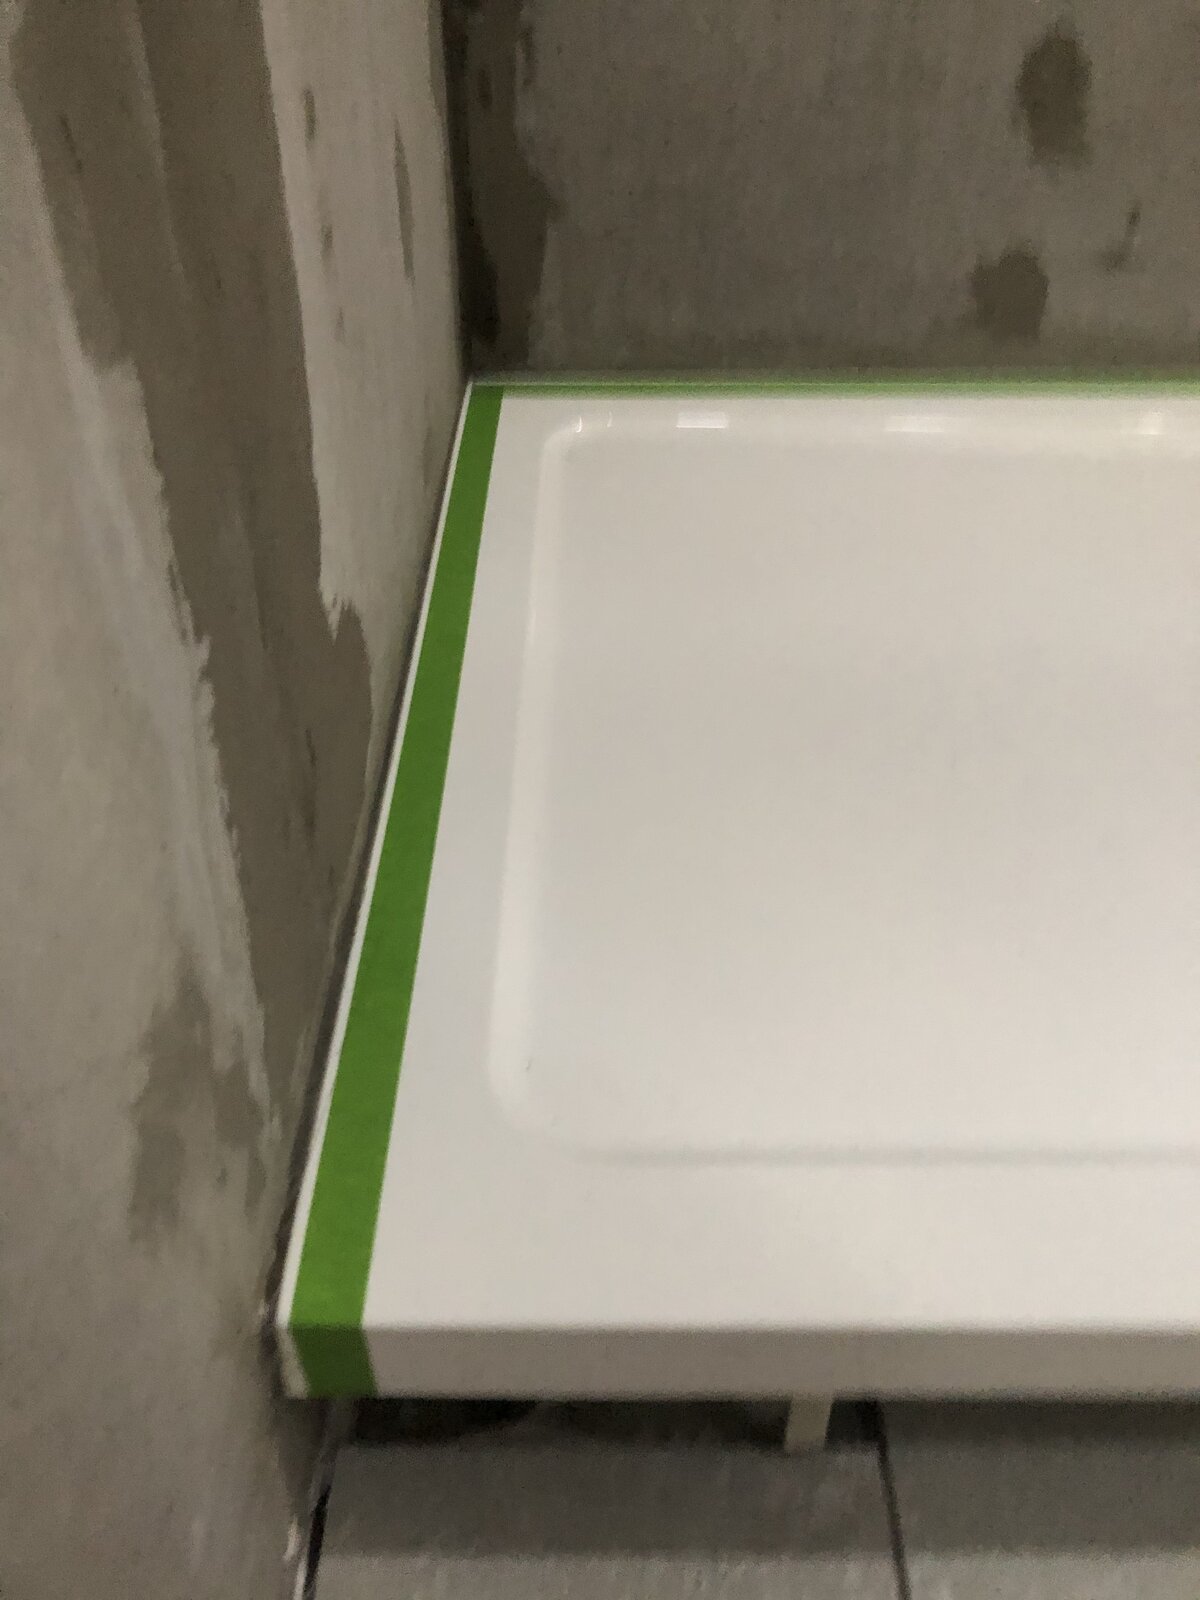 Cement board shower tray joint - waterproofing | DIYnot Forums